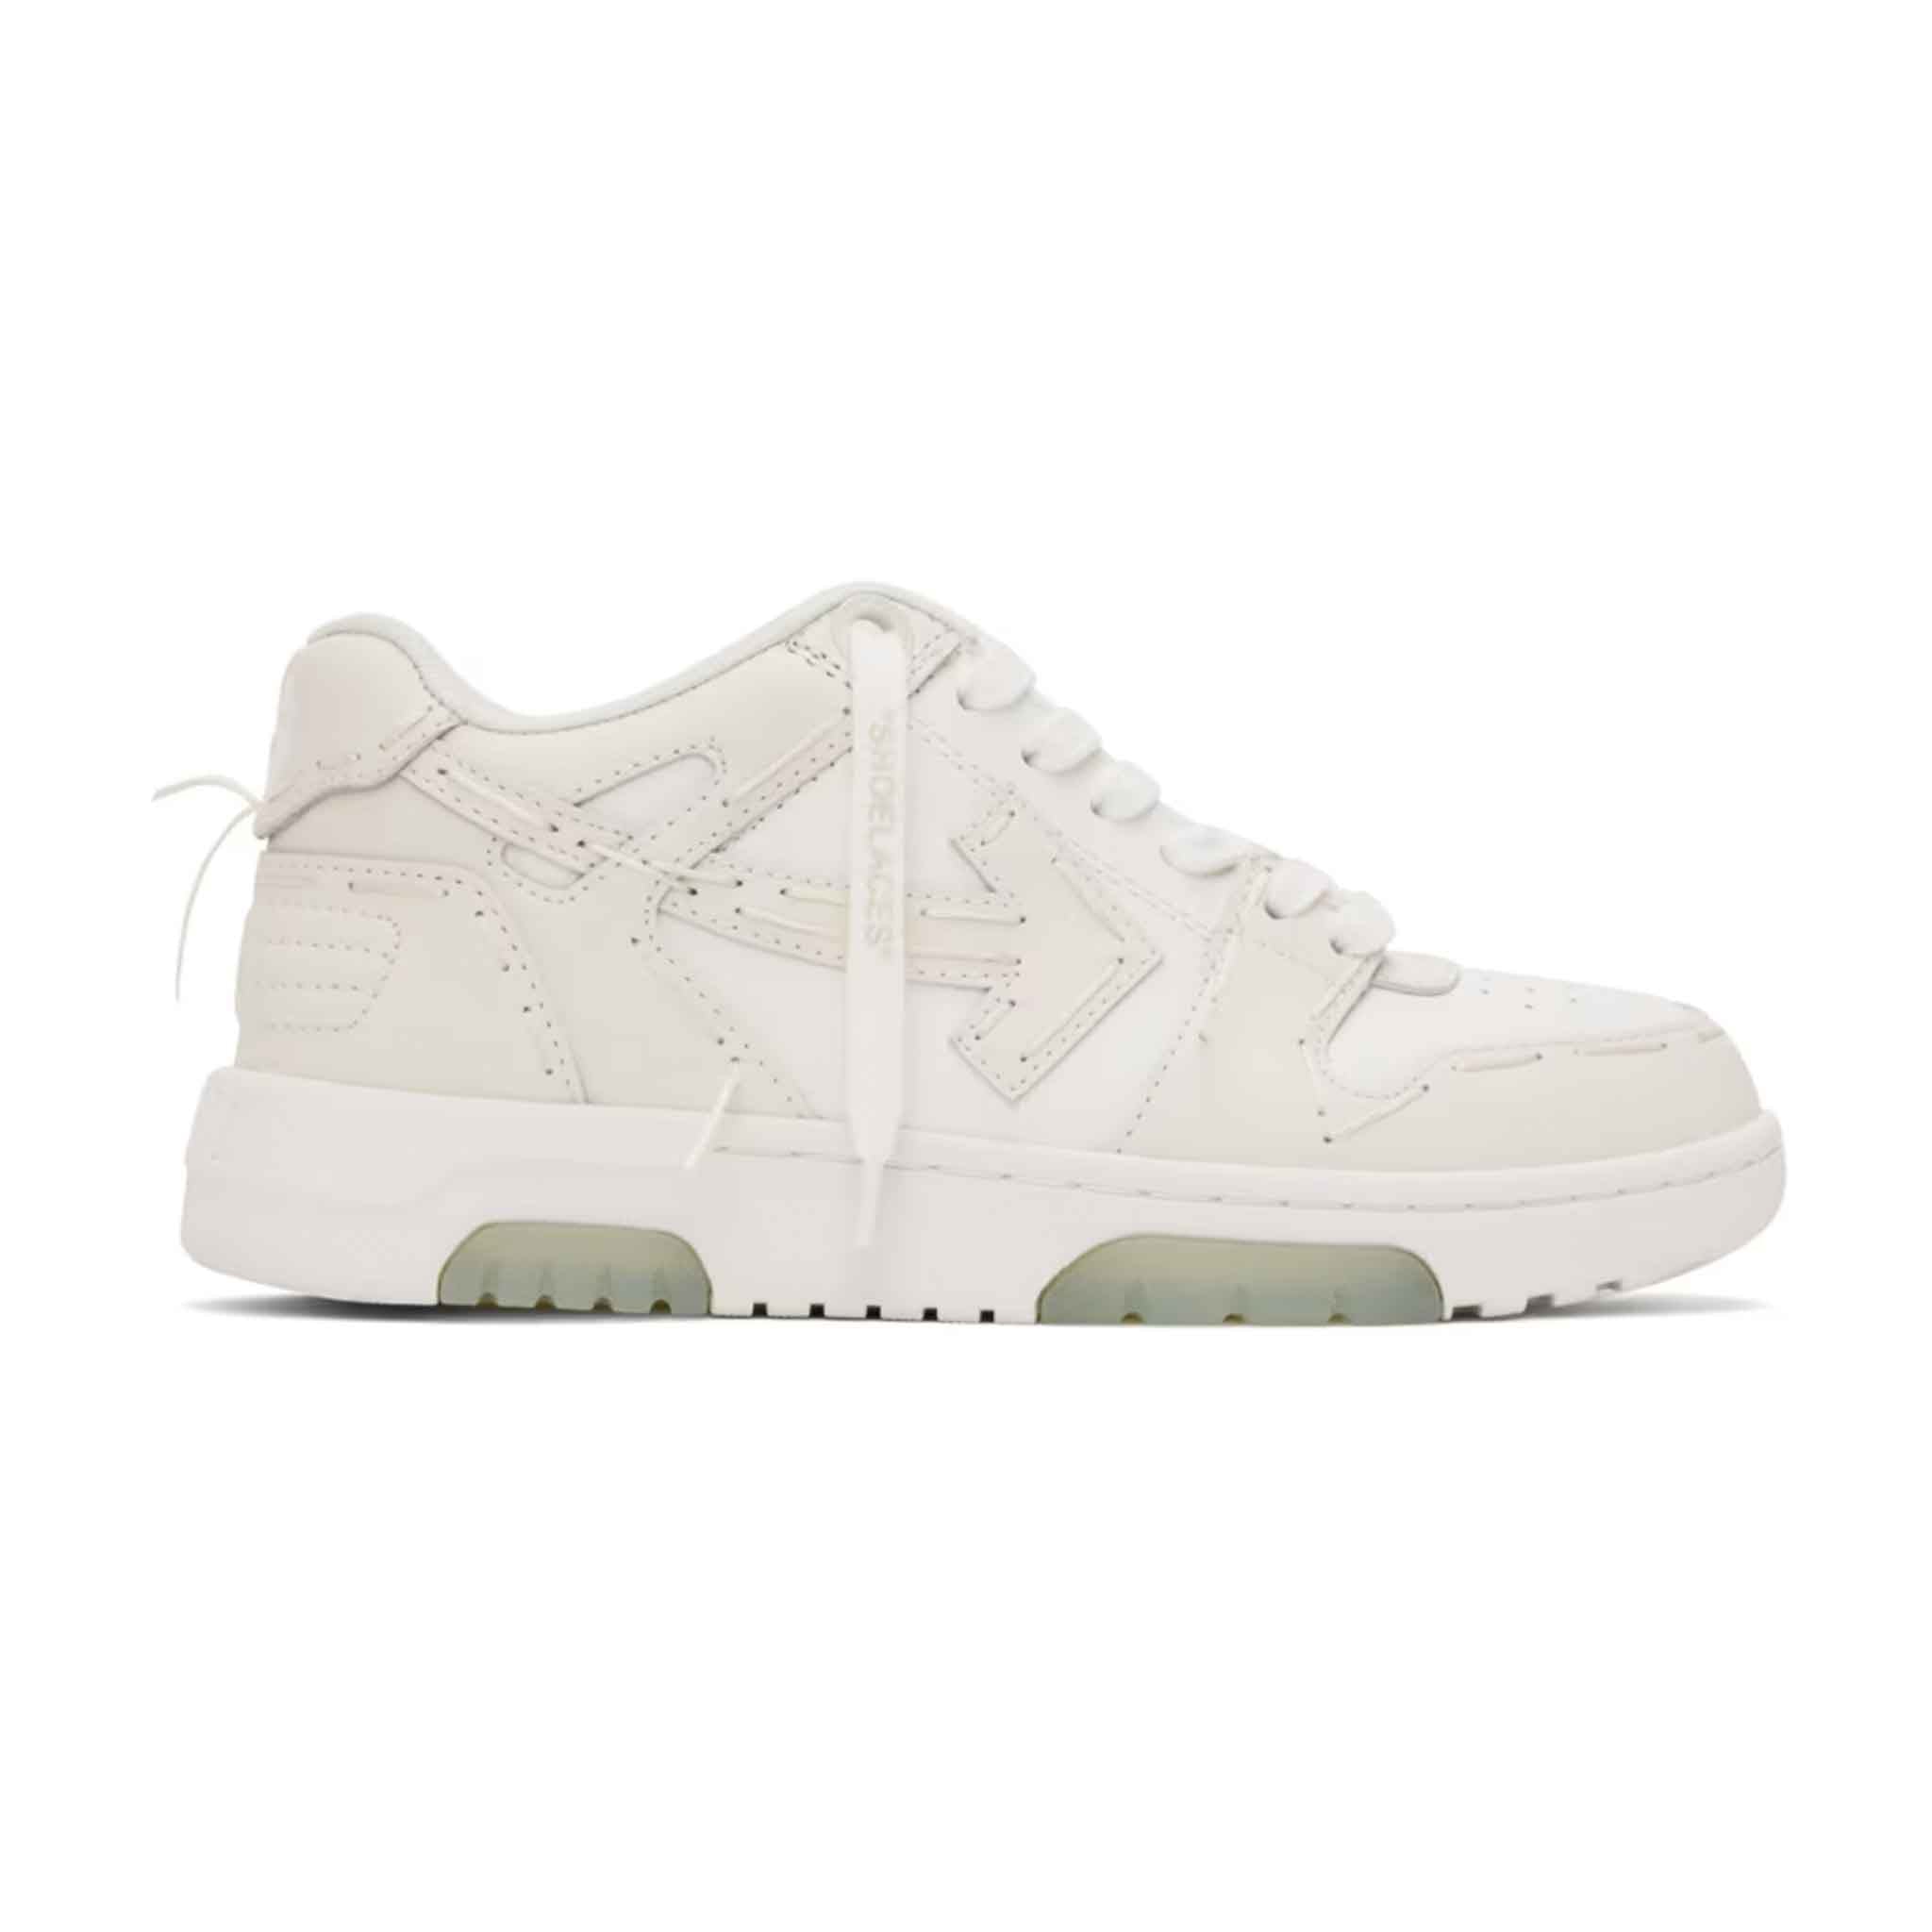 OFF-WHITE Out Of Office Sartorial Stitching in White/ Coconut